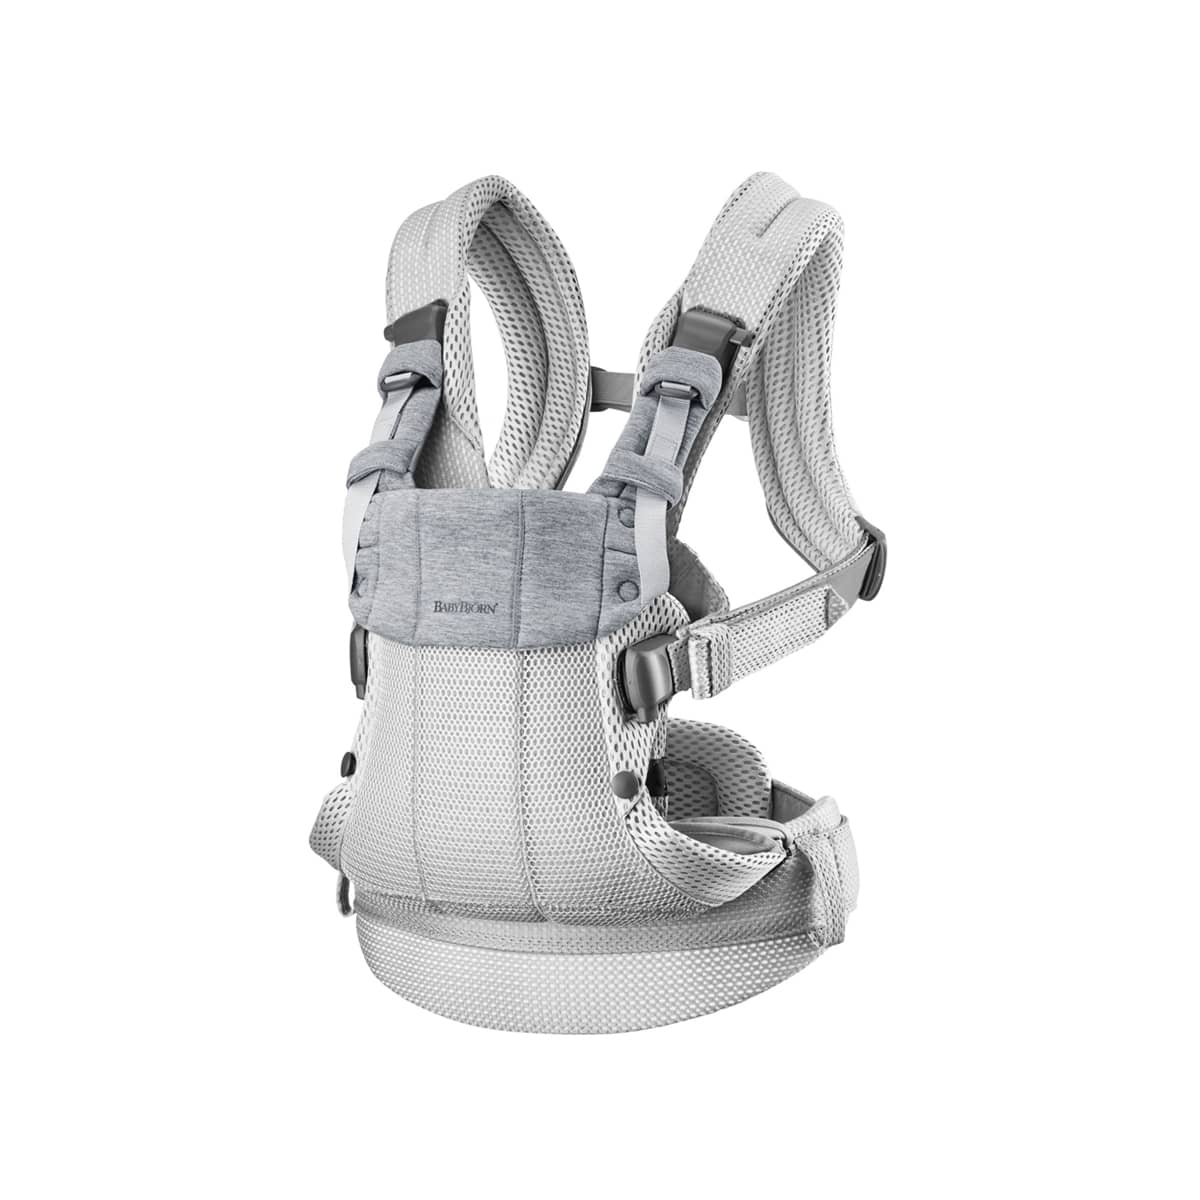 BabyBjorn Baby Carrier Harmony - Silver 3D Mesh